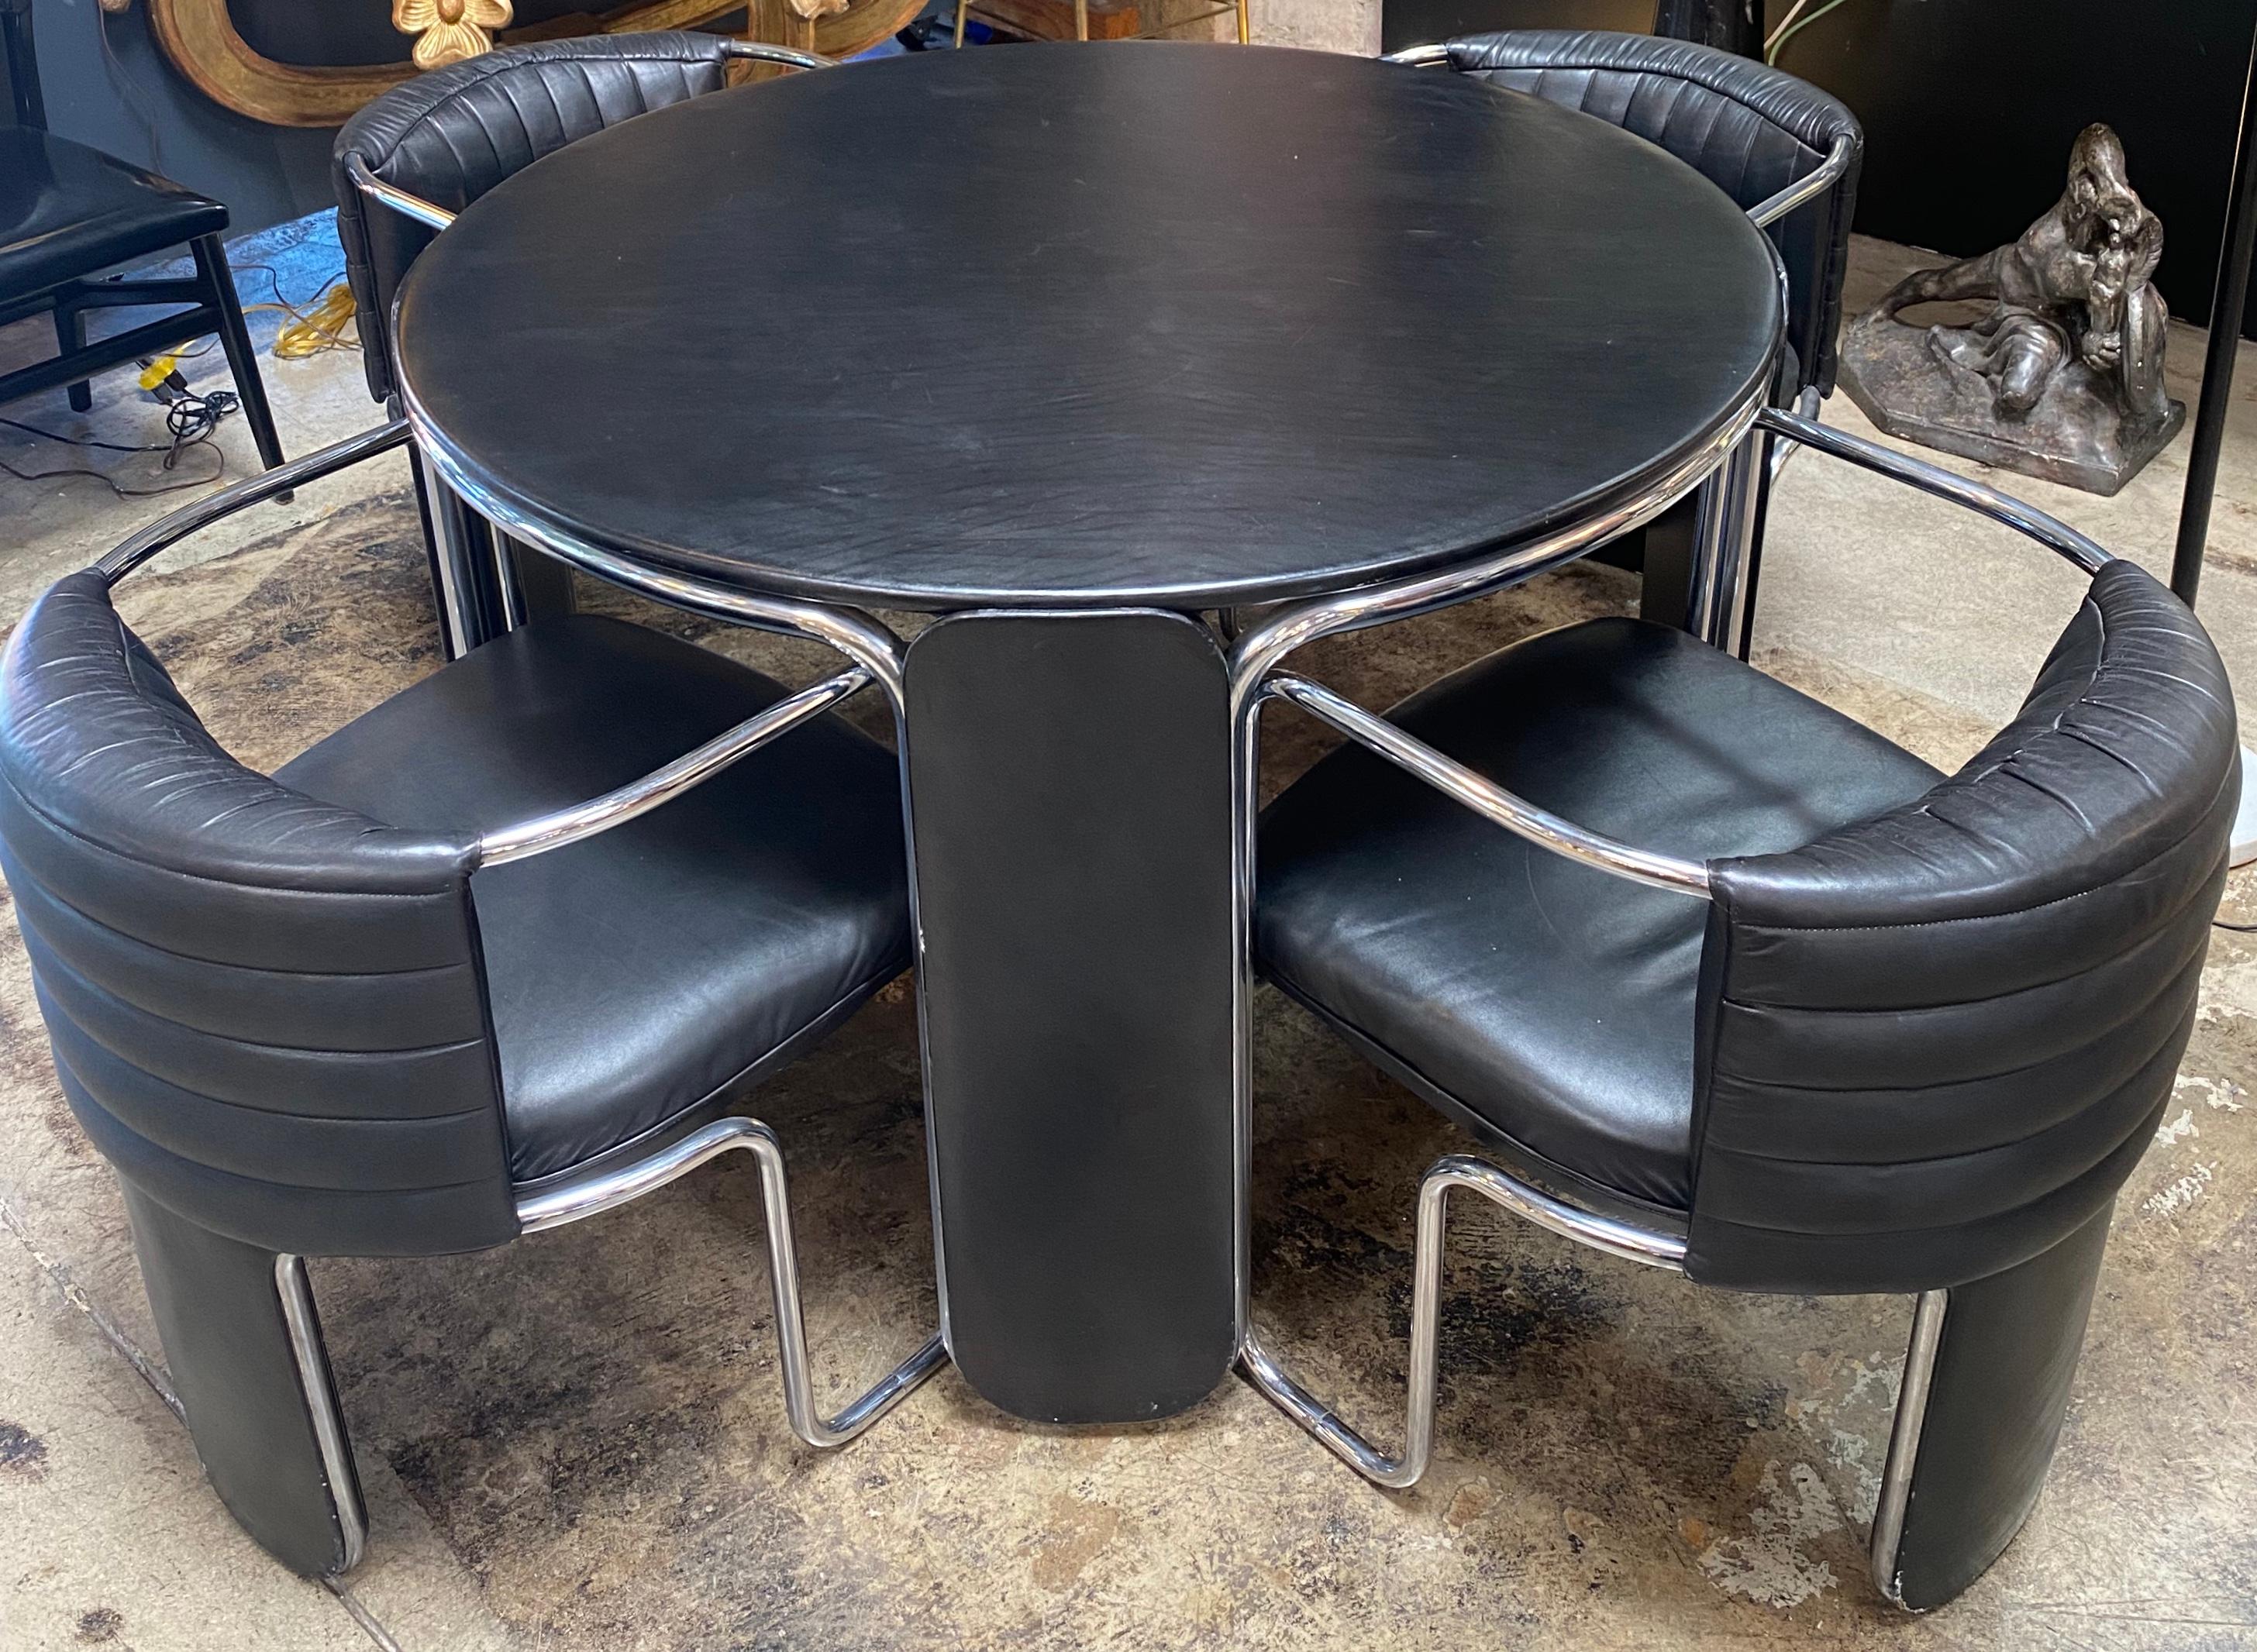 Extraordinary game table plus matching chairs in leather and crome By Luigi Massoni for Poltrona Frau. The table was made in 1975 and is in great conditions.

Born in Milan, Massoni trained at the Collettivo di Architettura in Milan and worked as